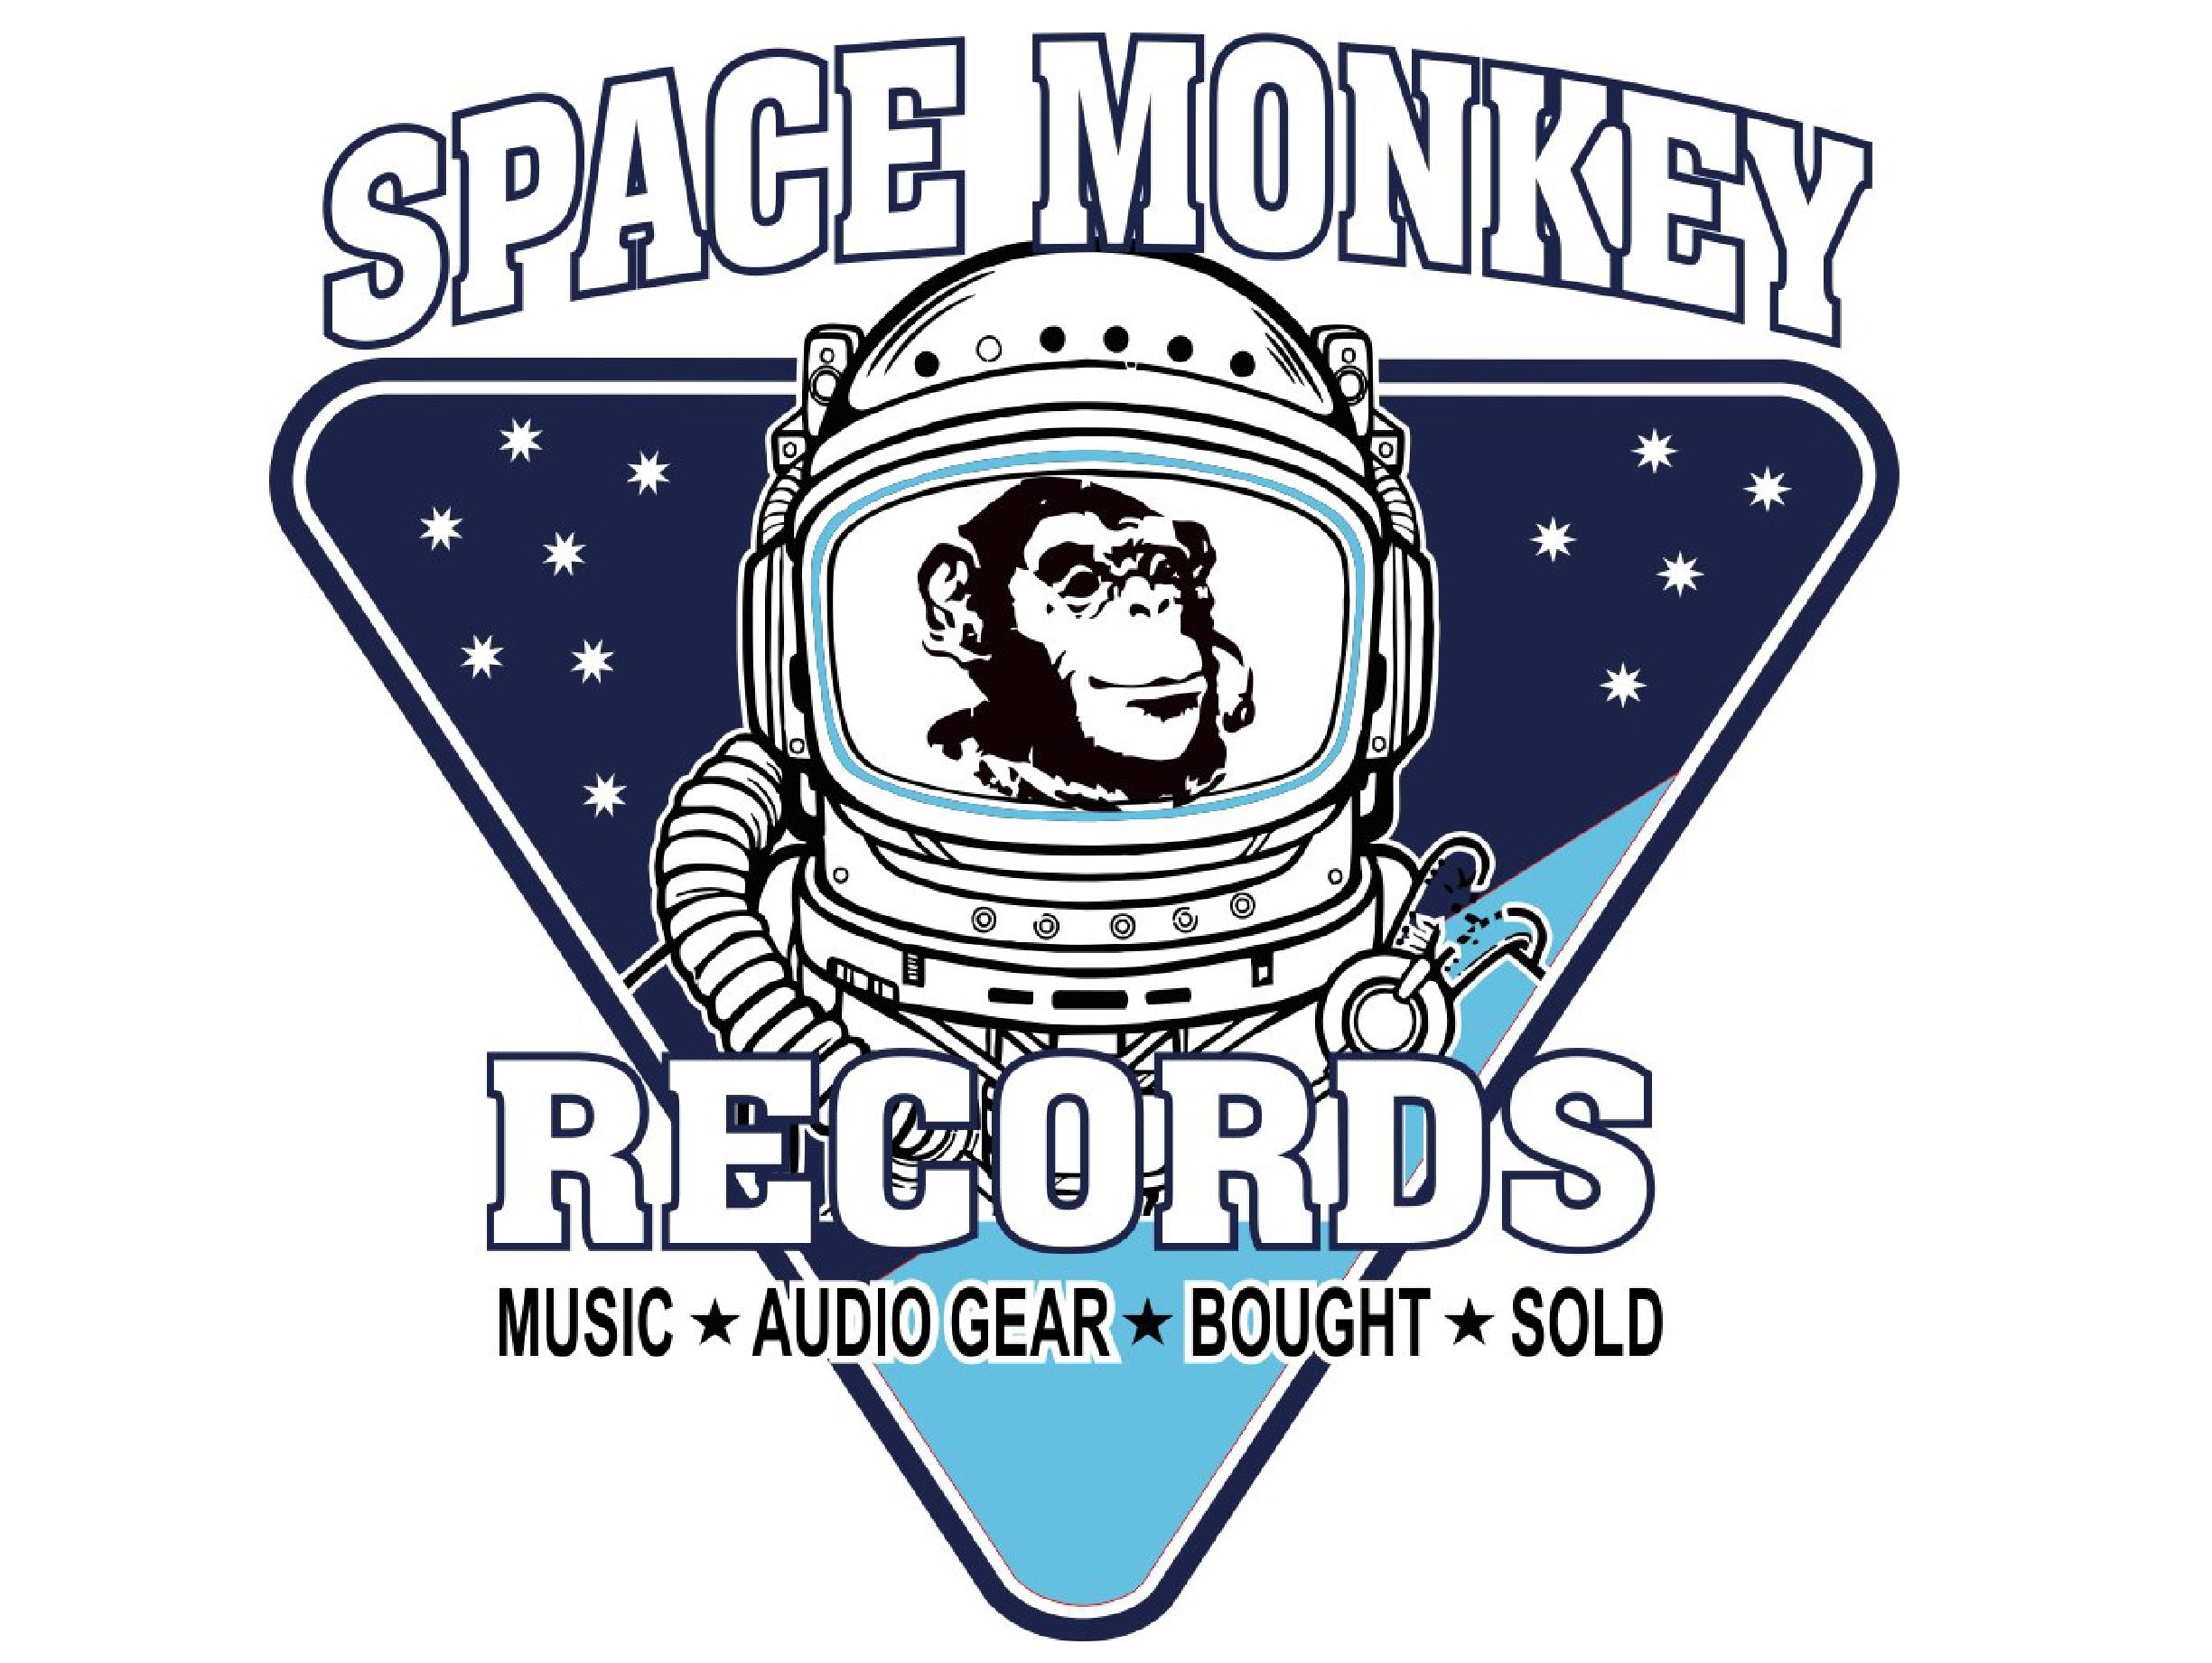 Space Monkey Records